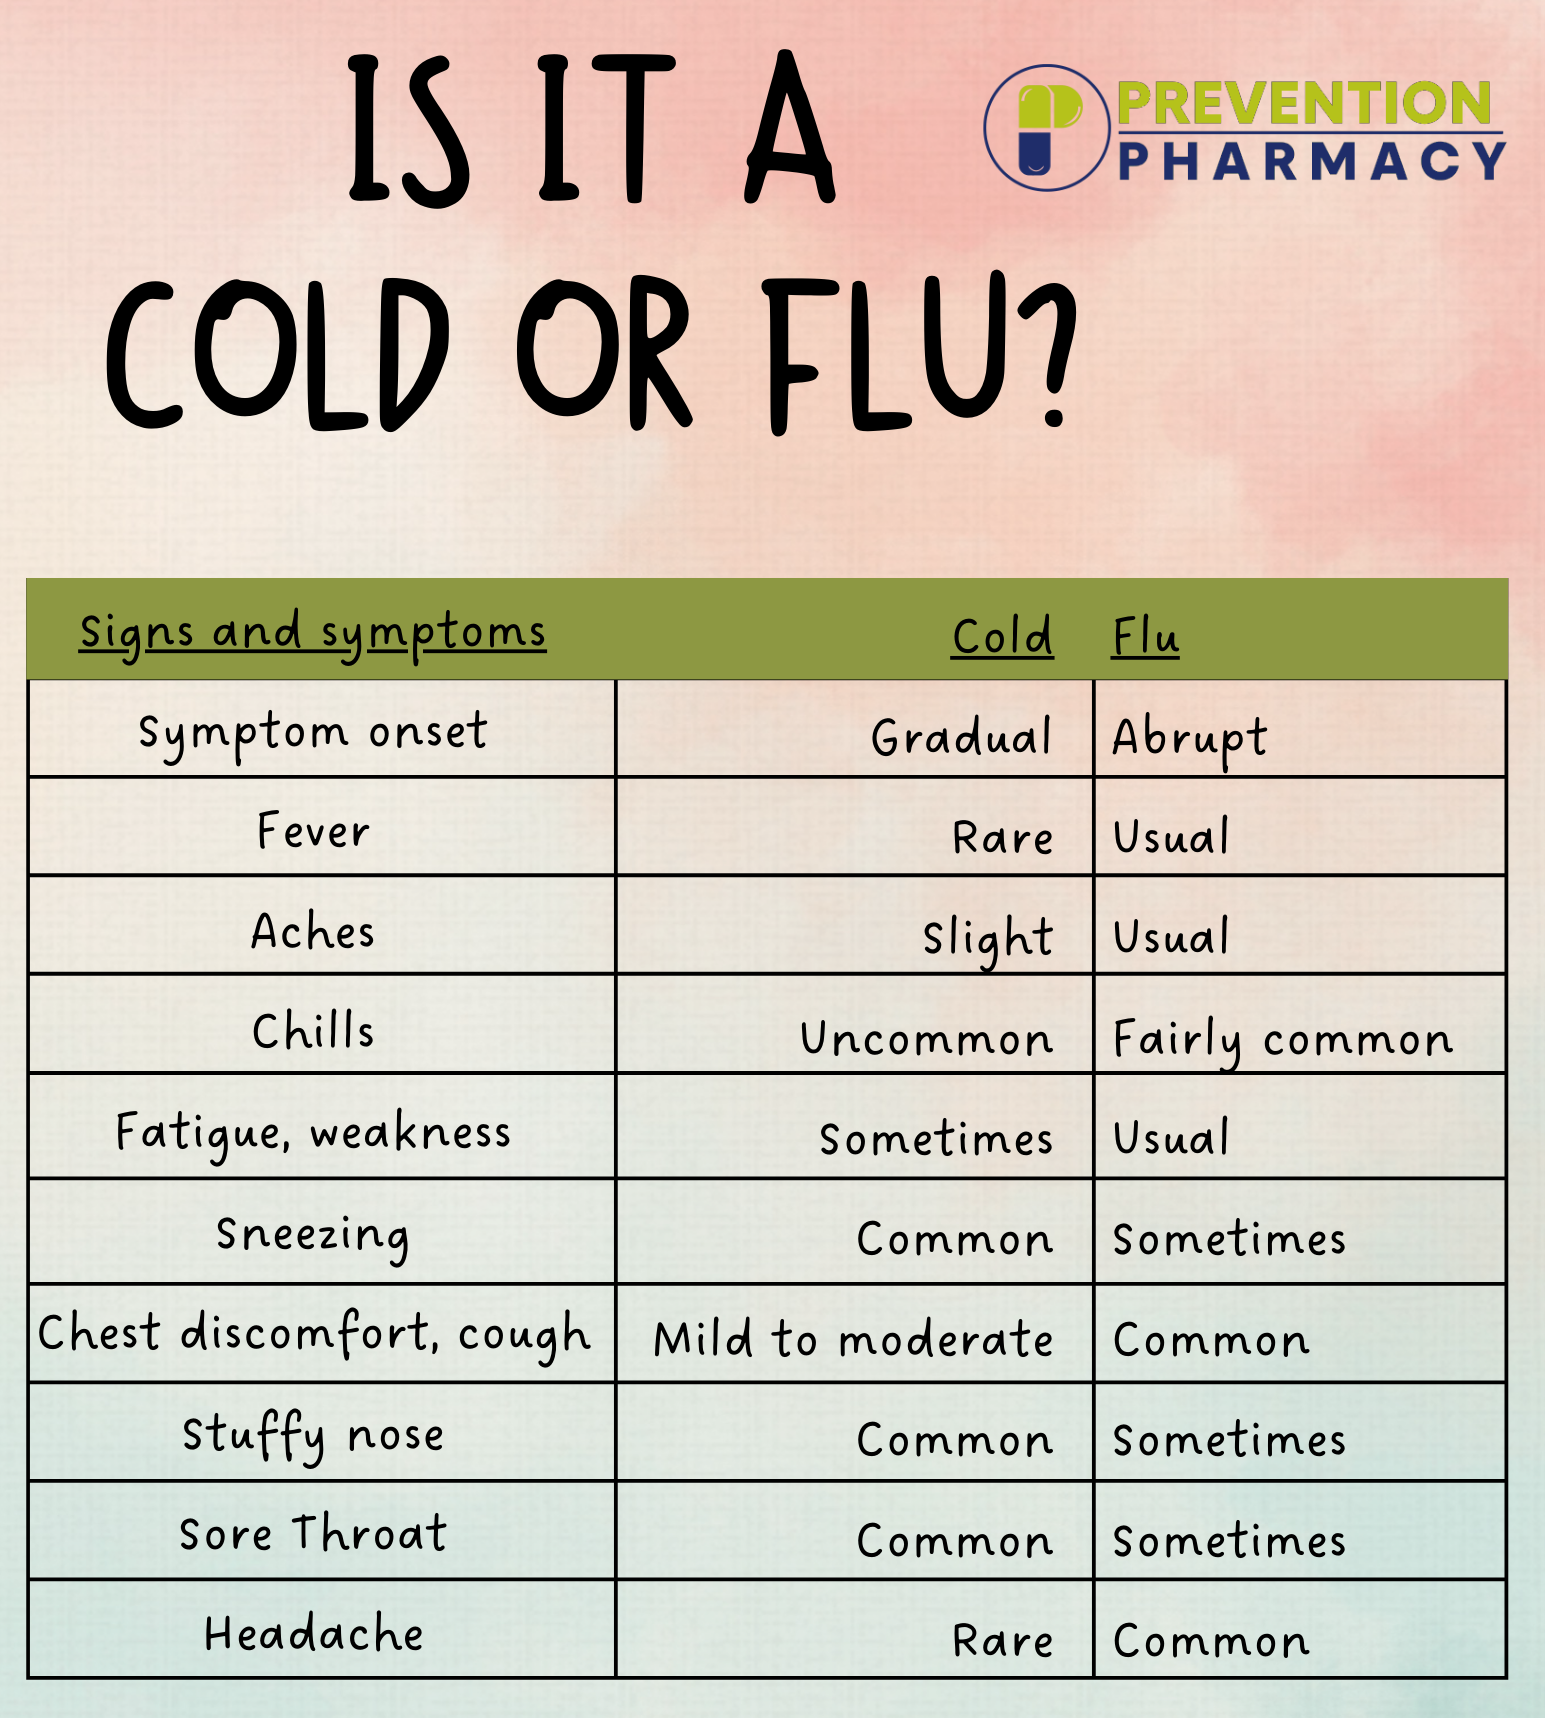 Cold or flu